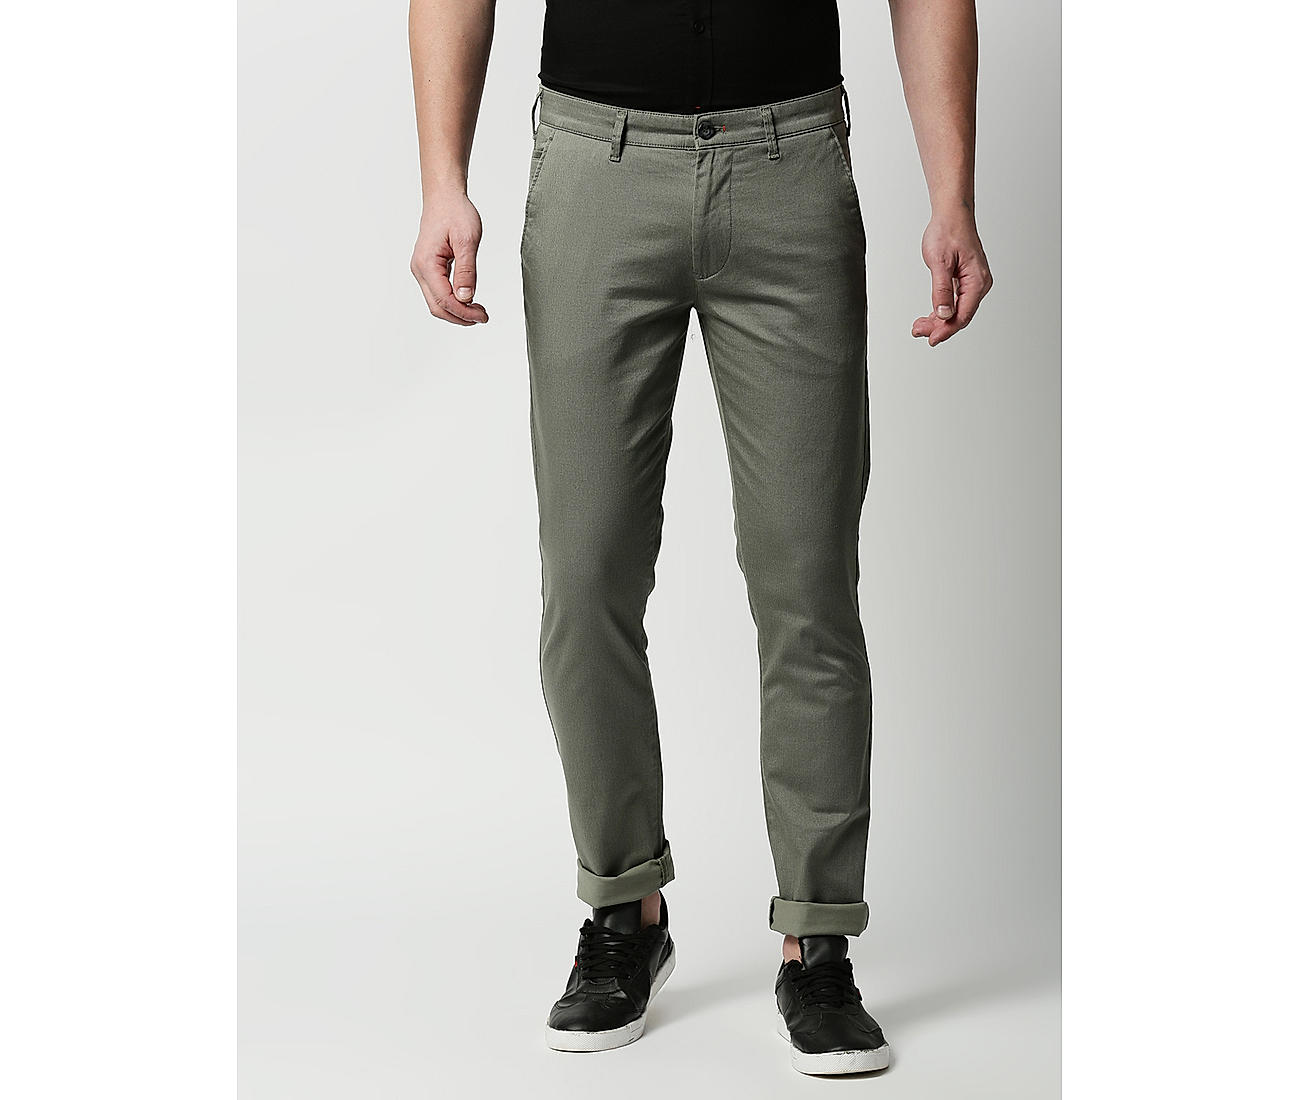 PLAYERS Mens Slim Fit Formal Trouser Combo Olive Green  PBlue